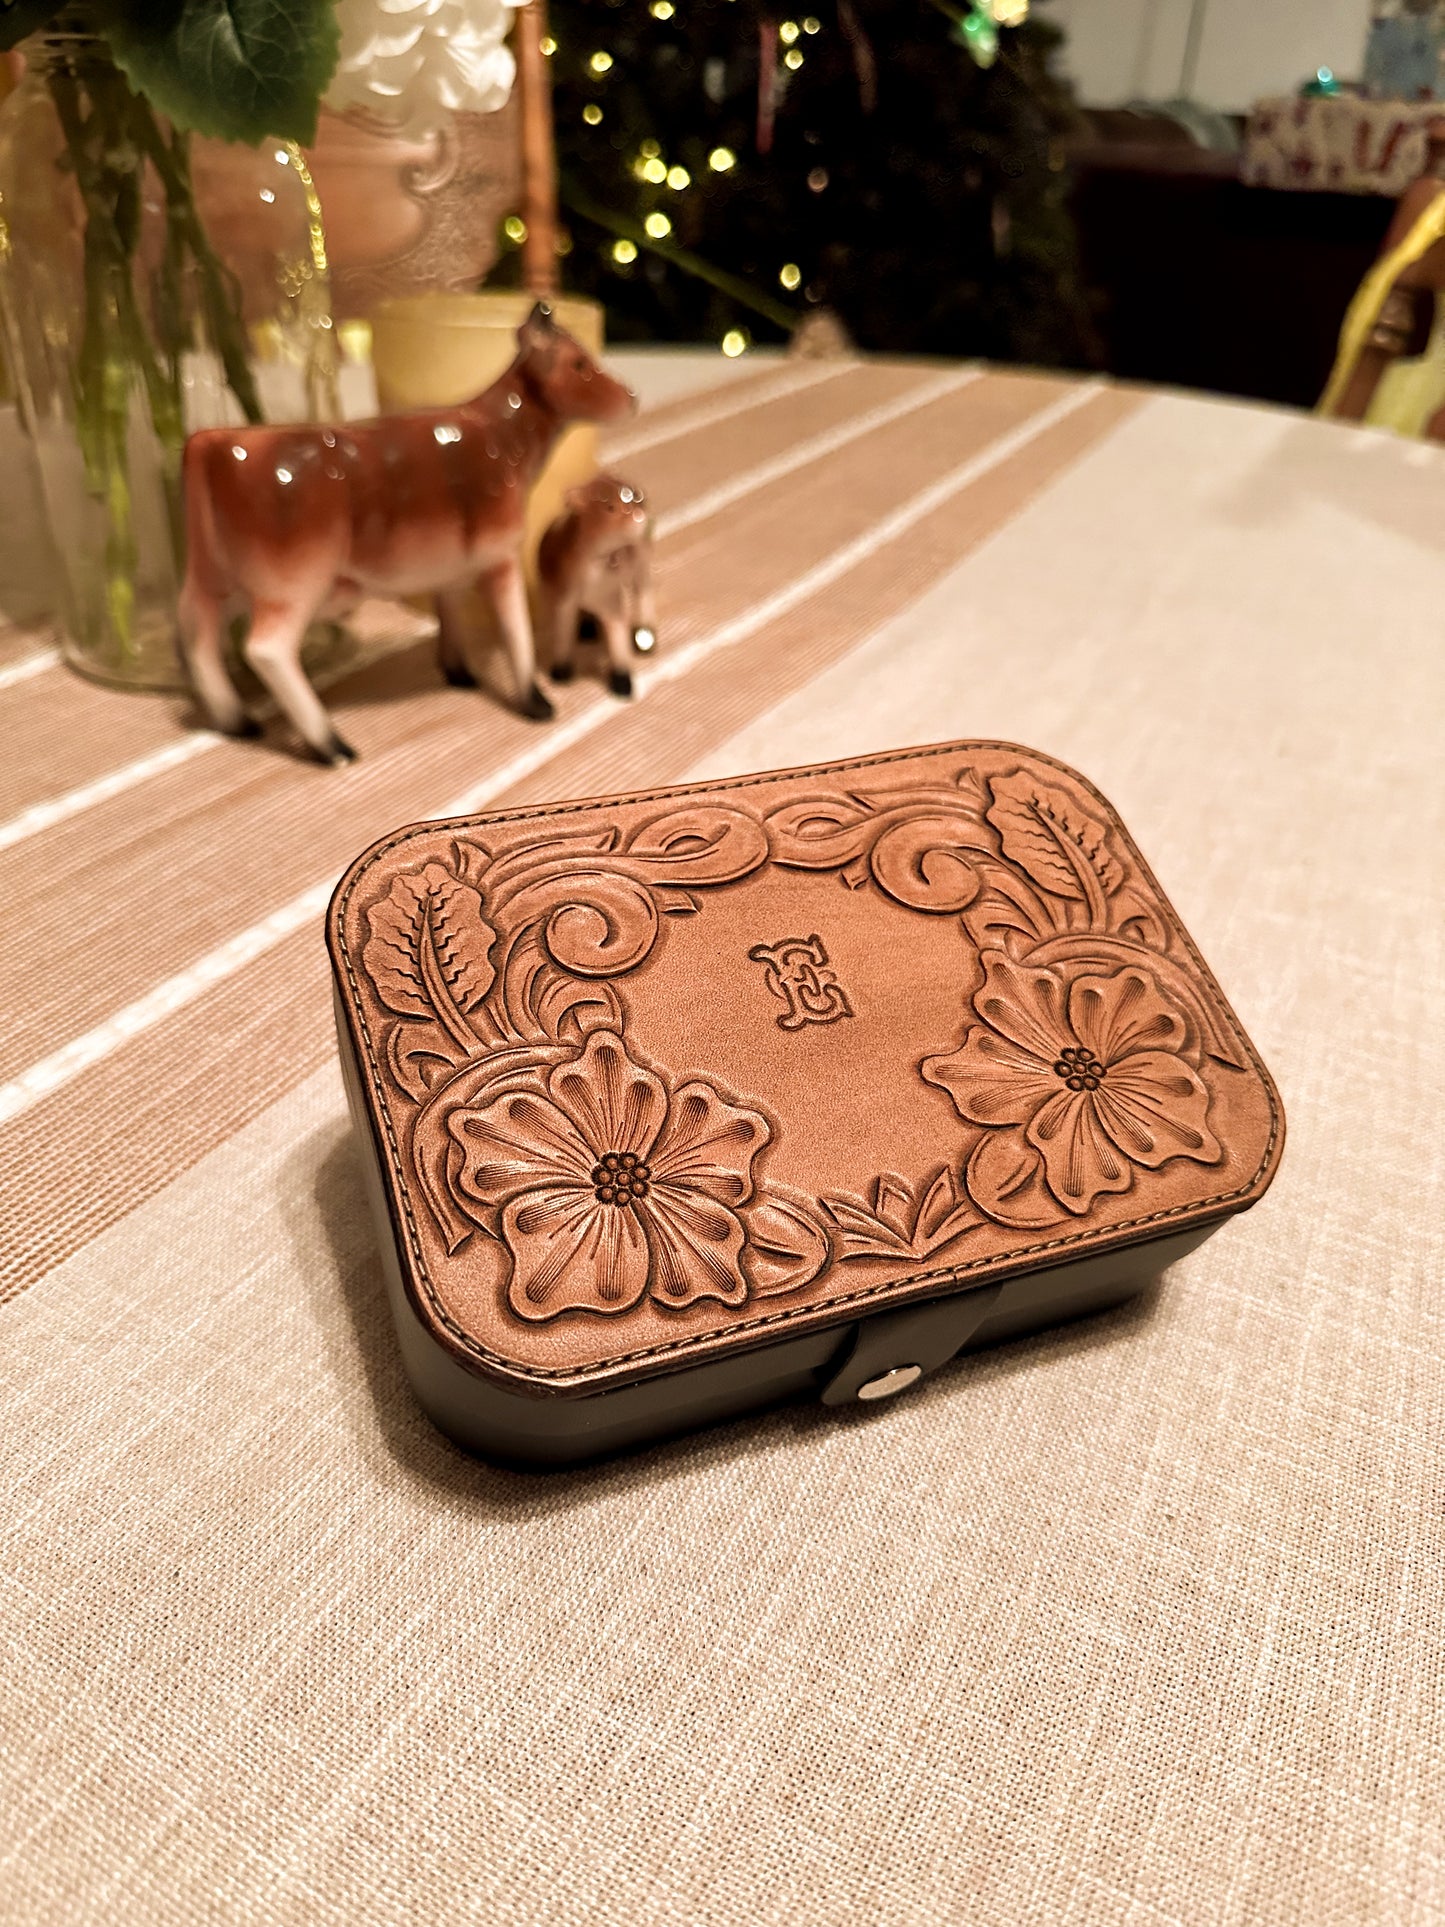 Tooled Leather Travel Jewelry Box